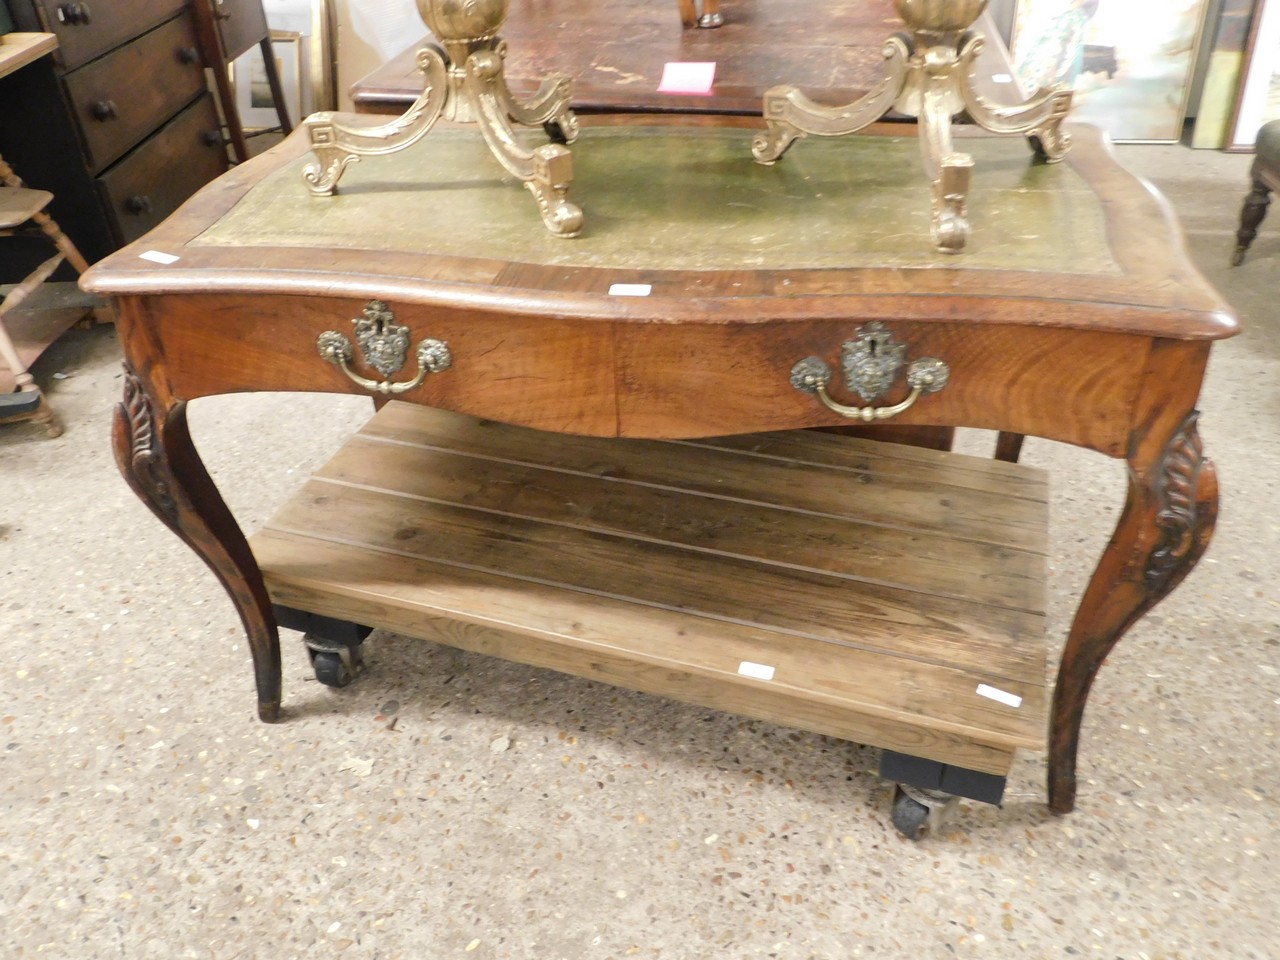 GOOD QUALITY FRENCH WALNUT DESK WITH TWO DRAWERS WITH SWING HANDLES WITH GREEN LEATHER INSERT ON